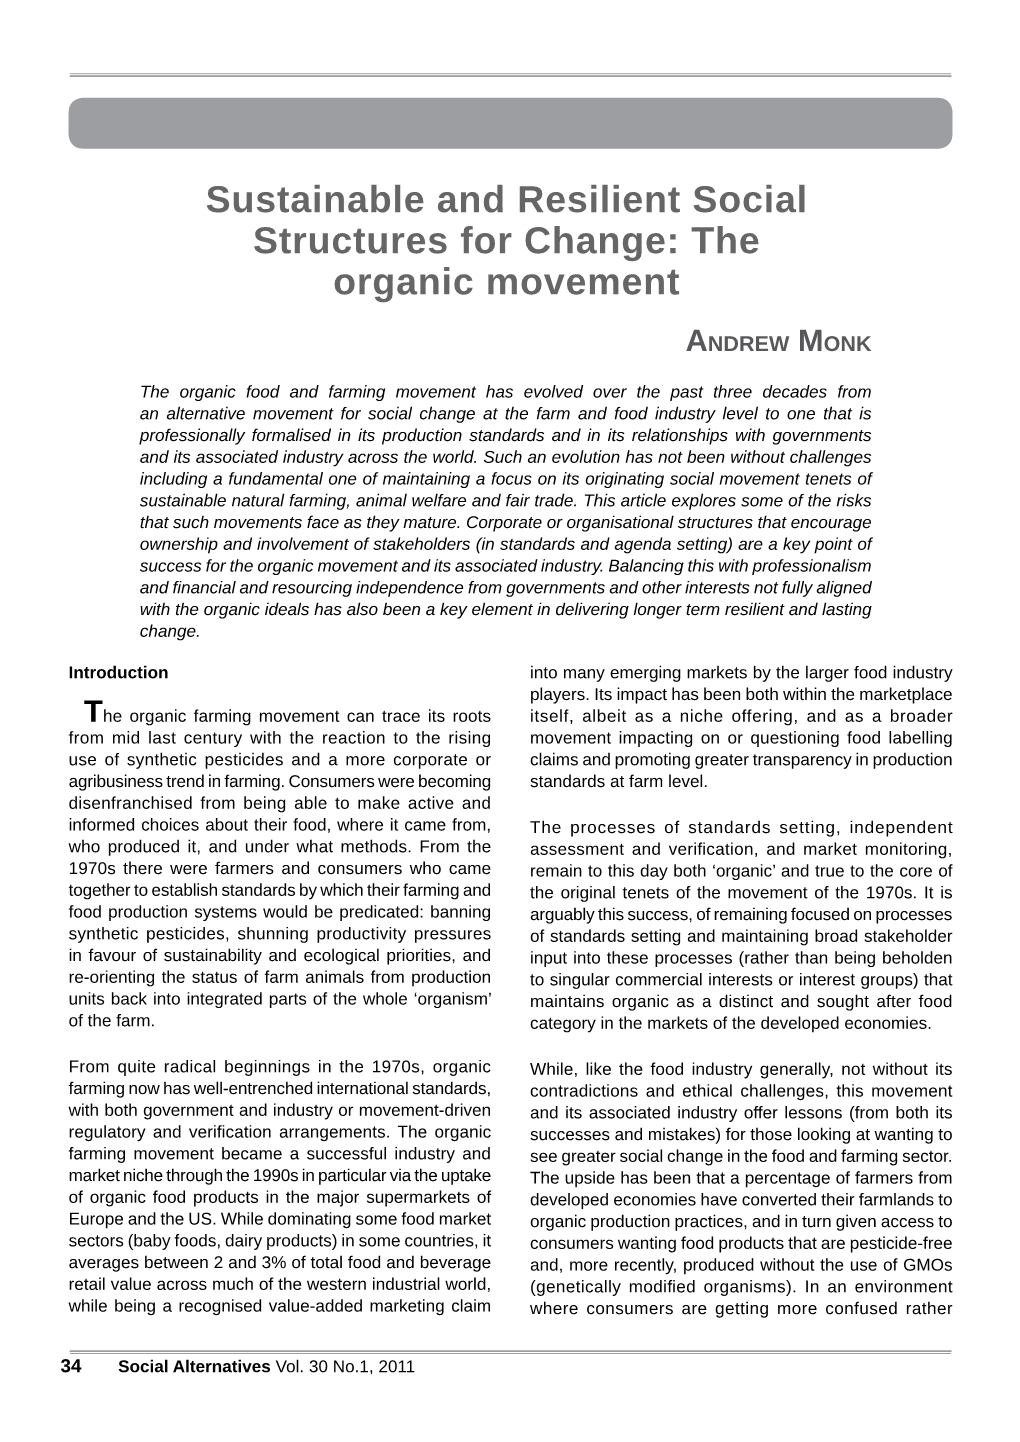 Sustainable and Resilient Social Structures for Change: the Organic Movement